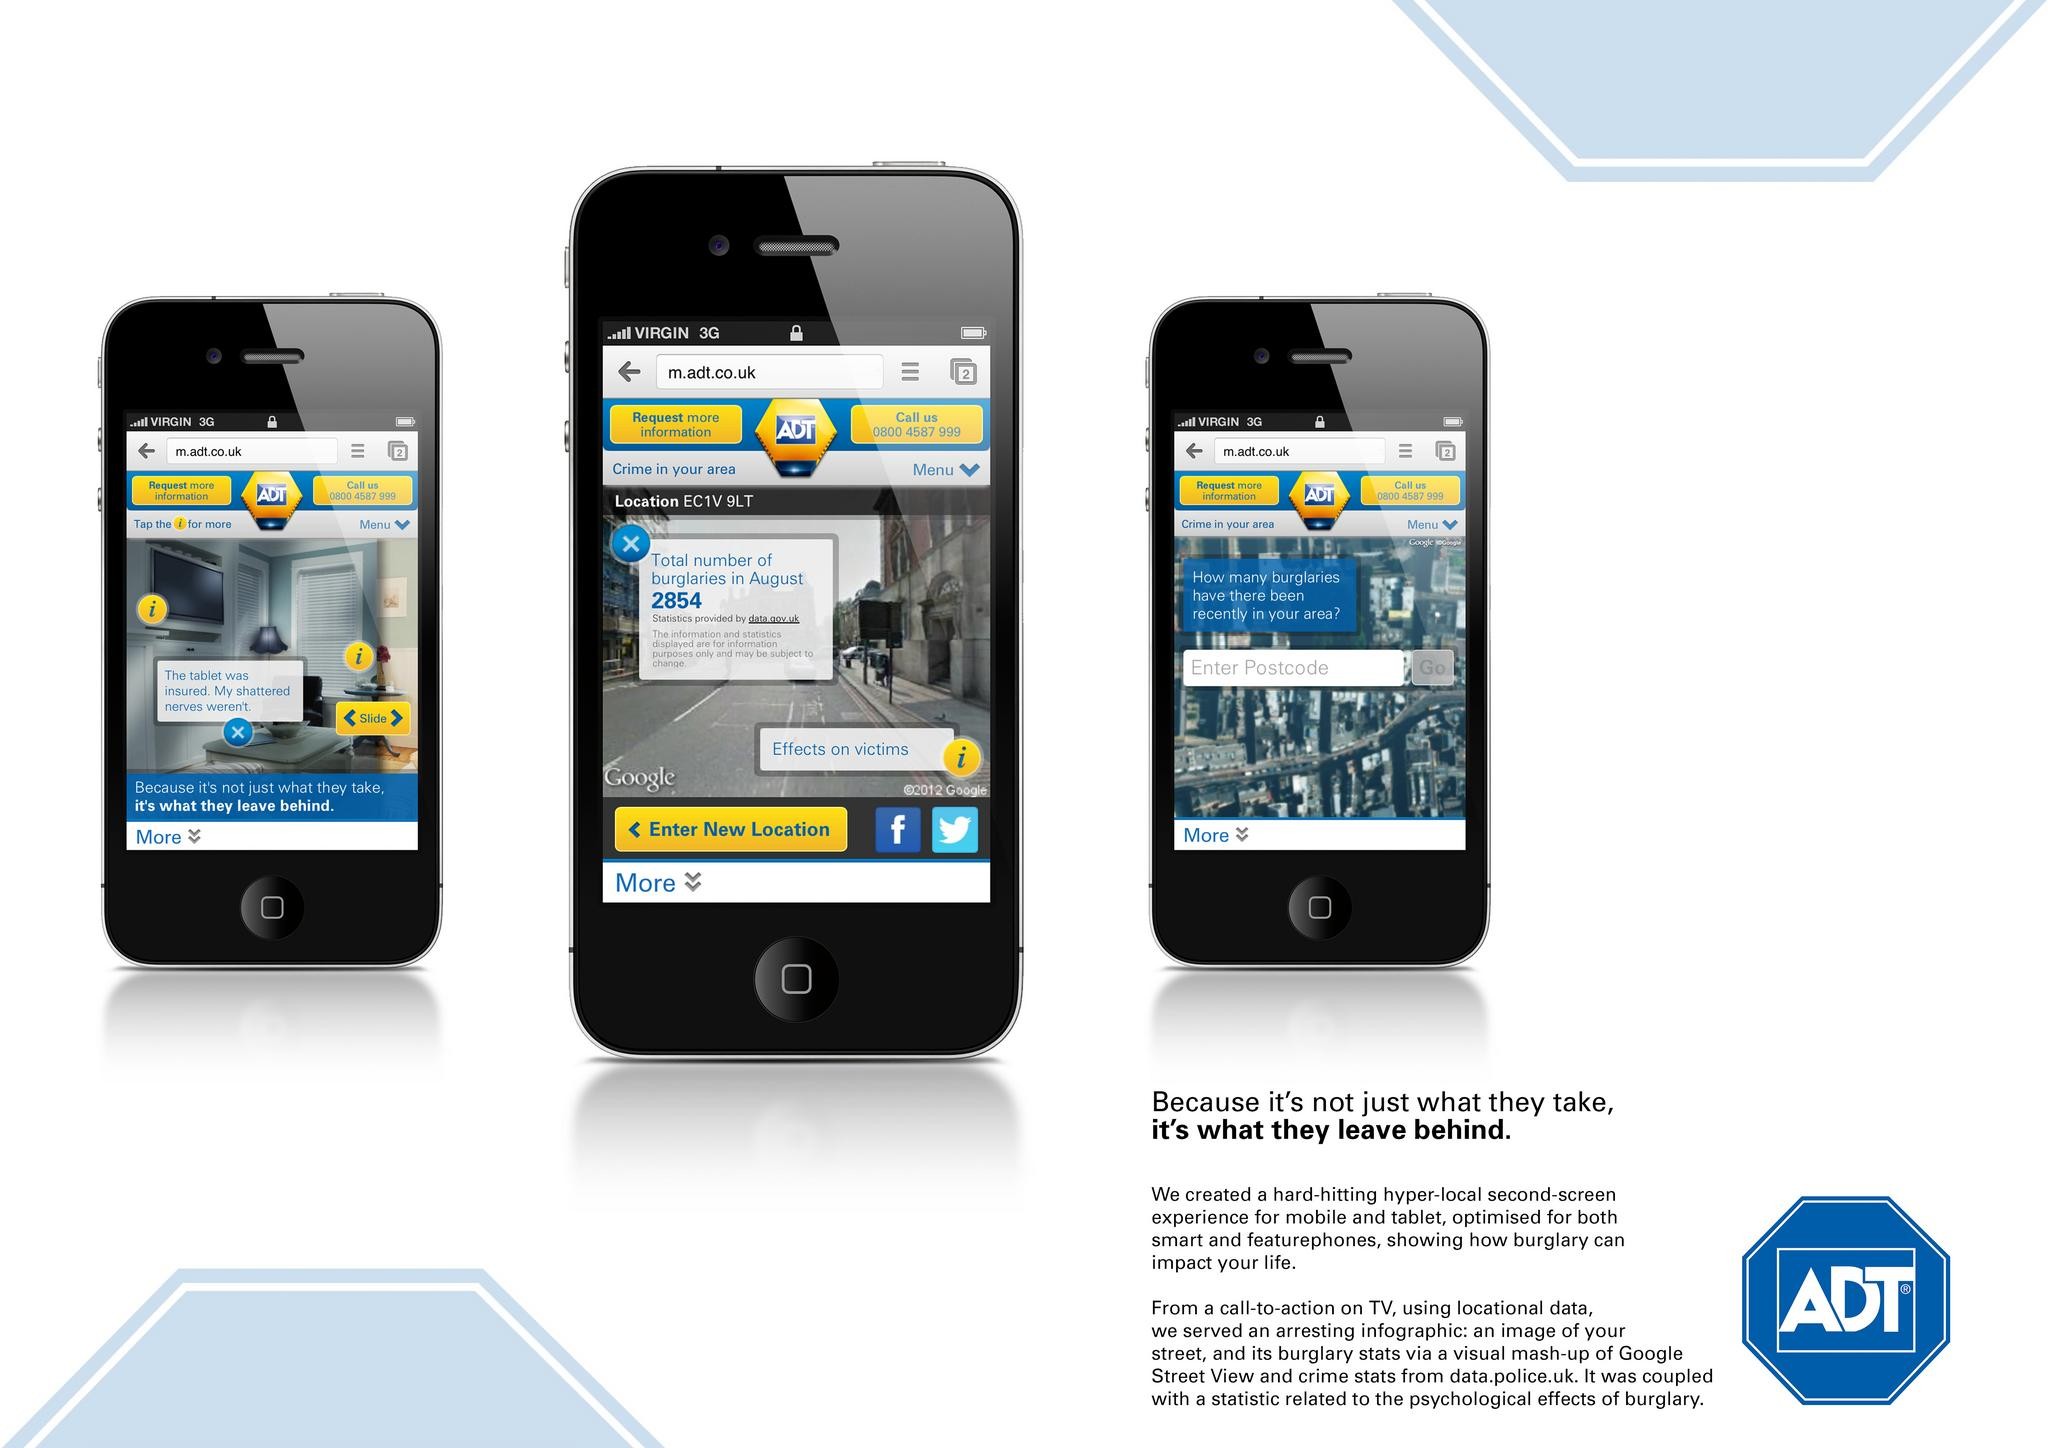 ADT INTEGRATED CAMPAIGN: MOBILE SITE